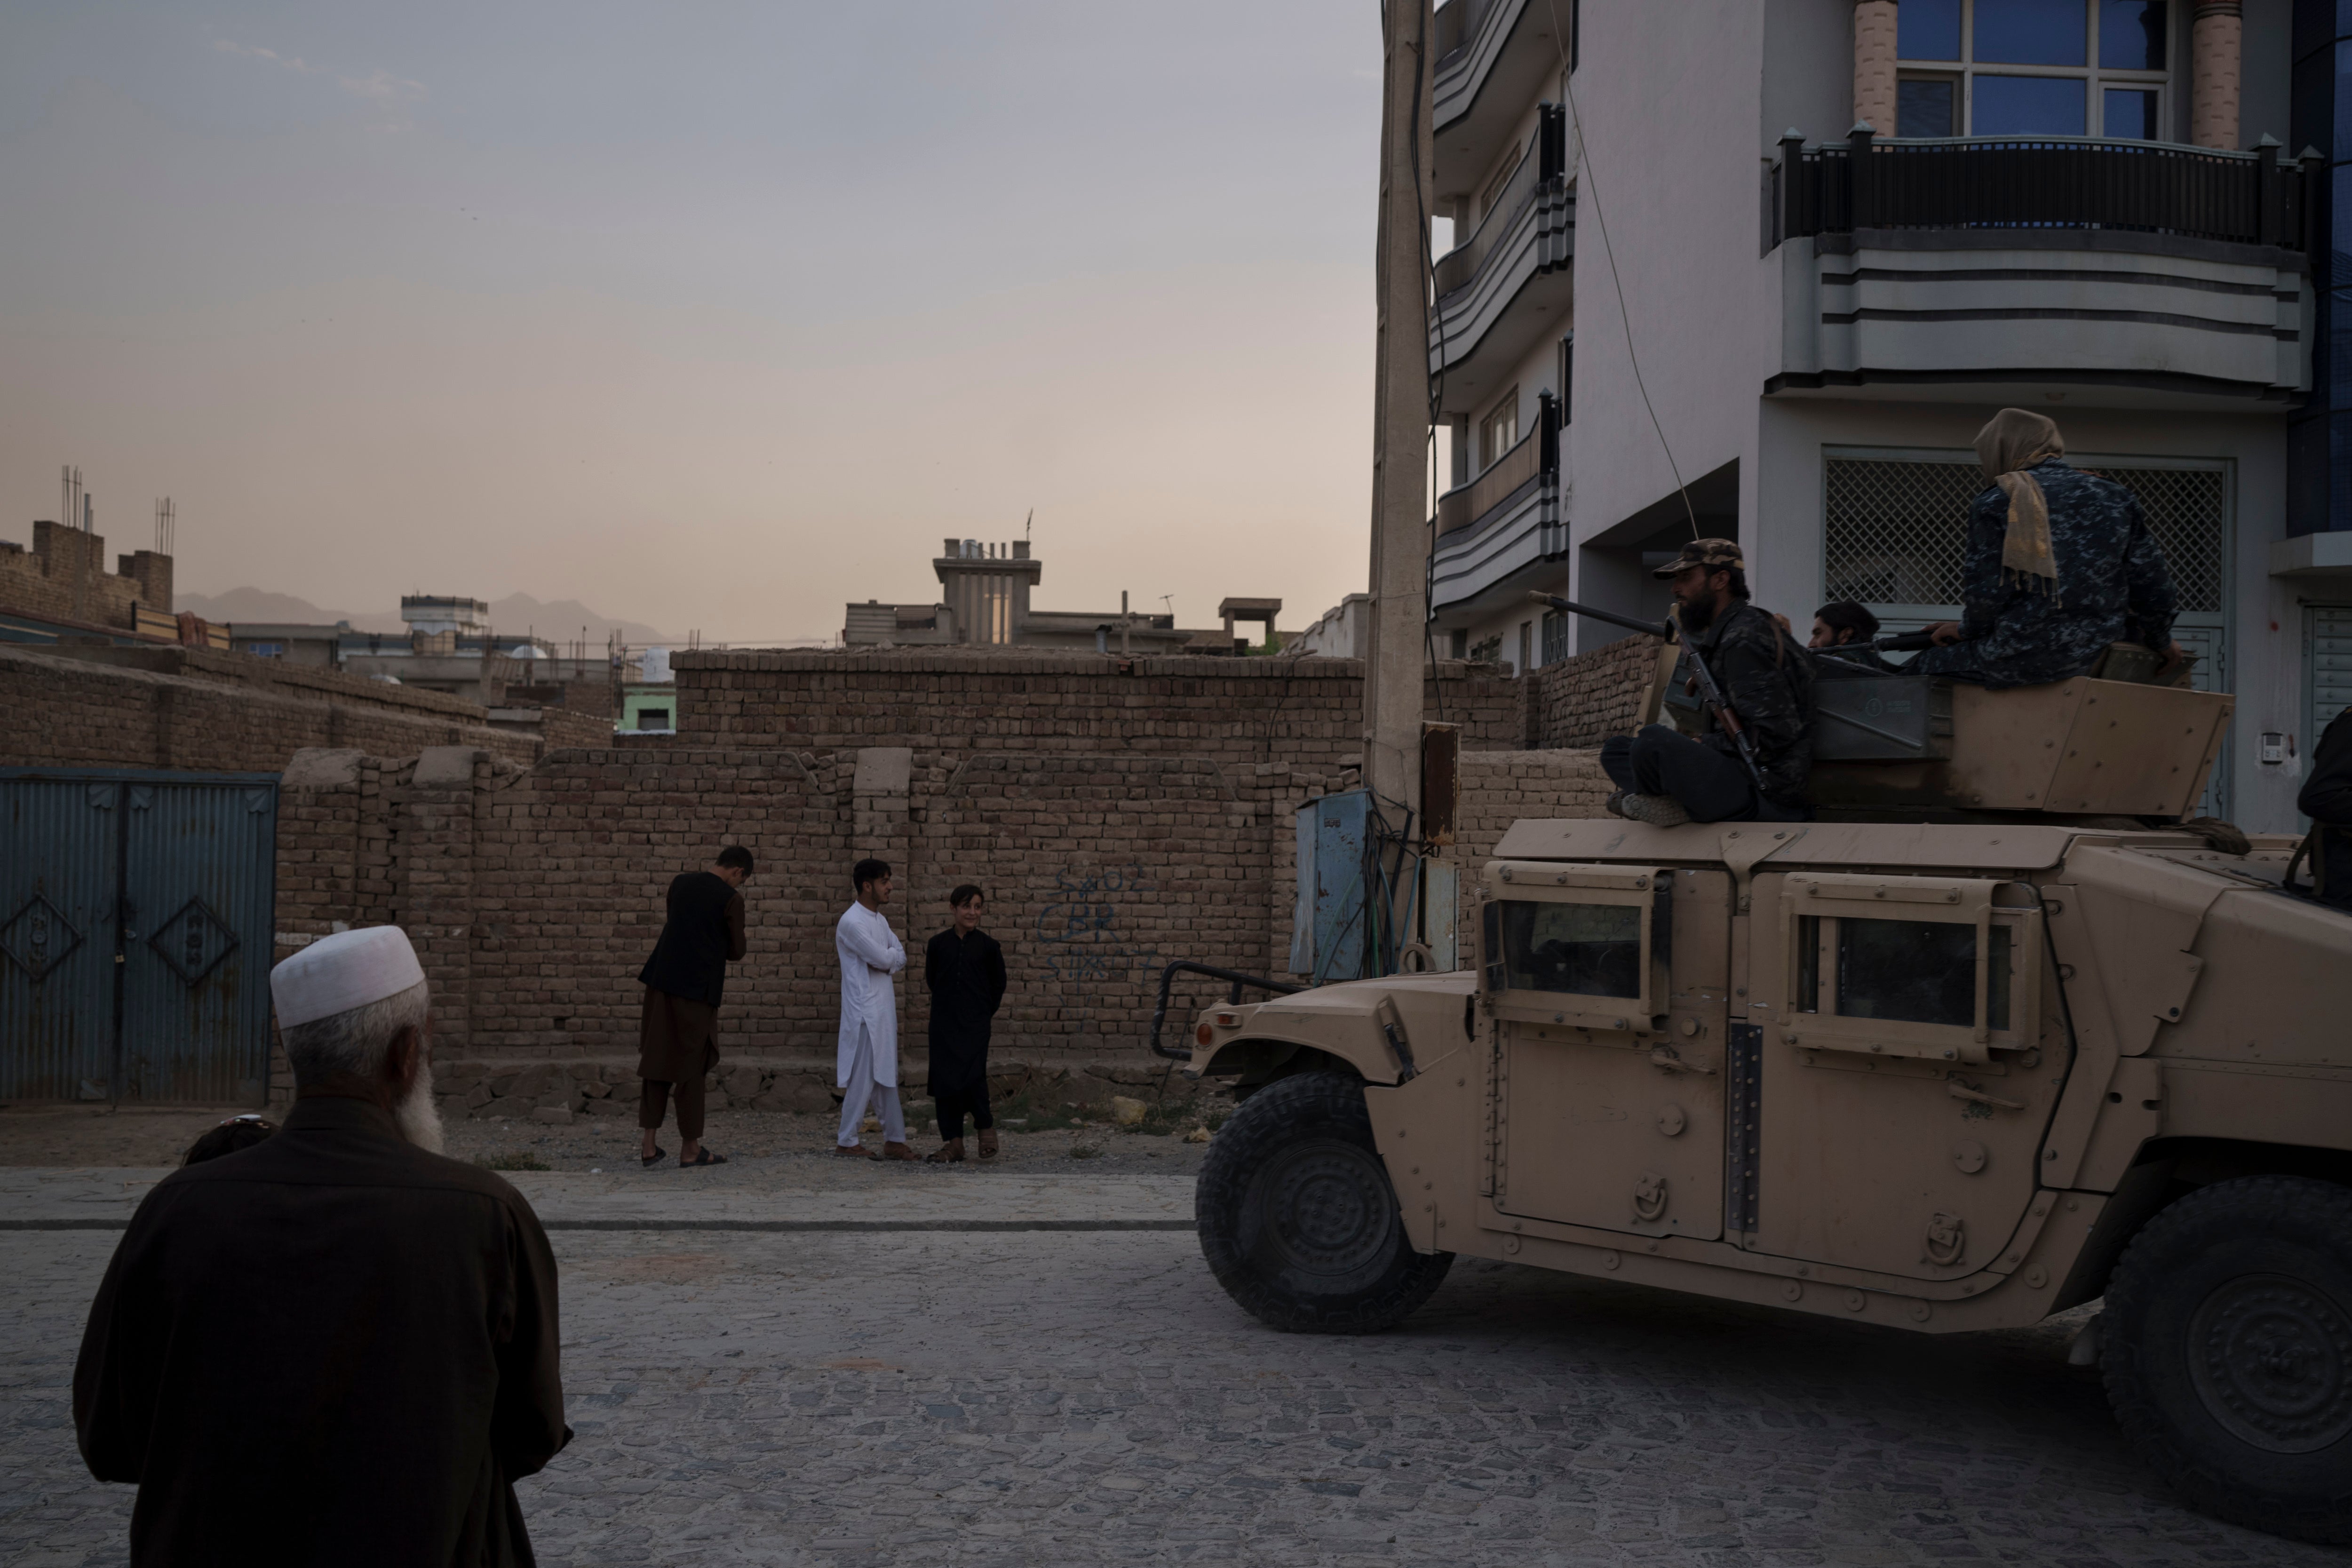 Many British nationals remain in Afghanistan in fear of the Taliban